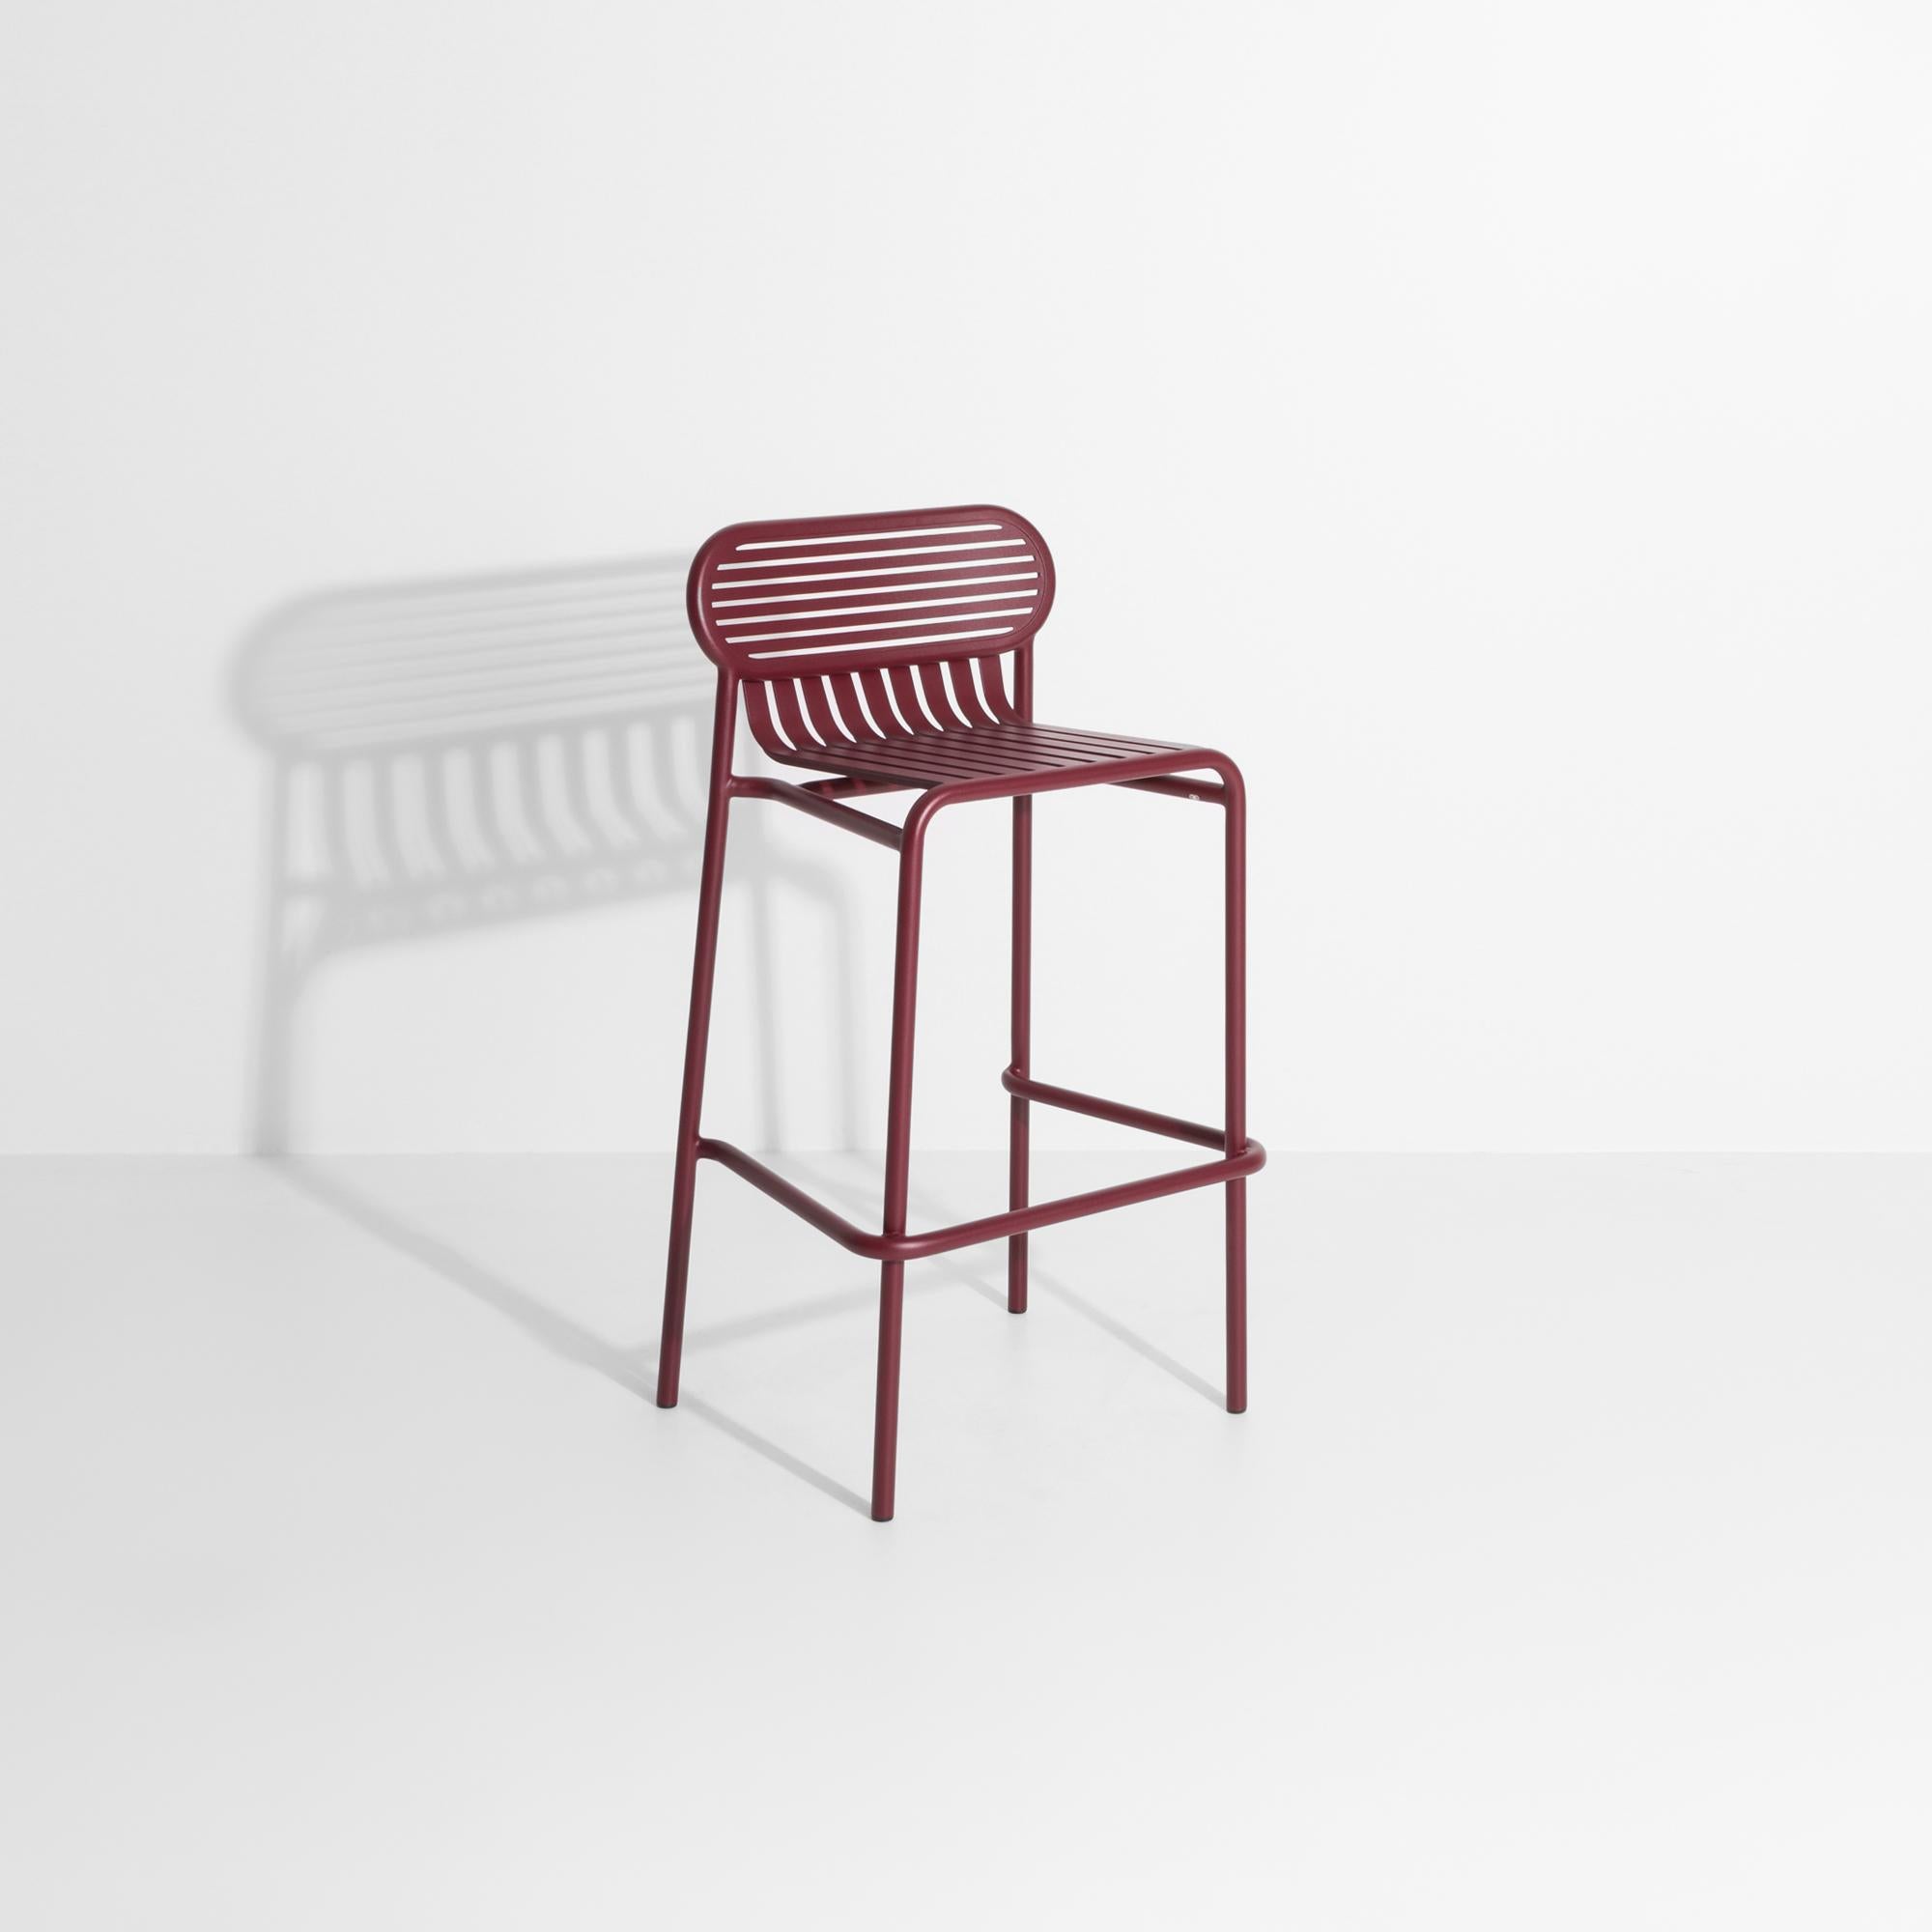 Contemporary Petite Friture Week-End Bar Stool in Burgundy Aluminium by Studio BrichetZiegler For Sale